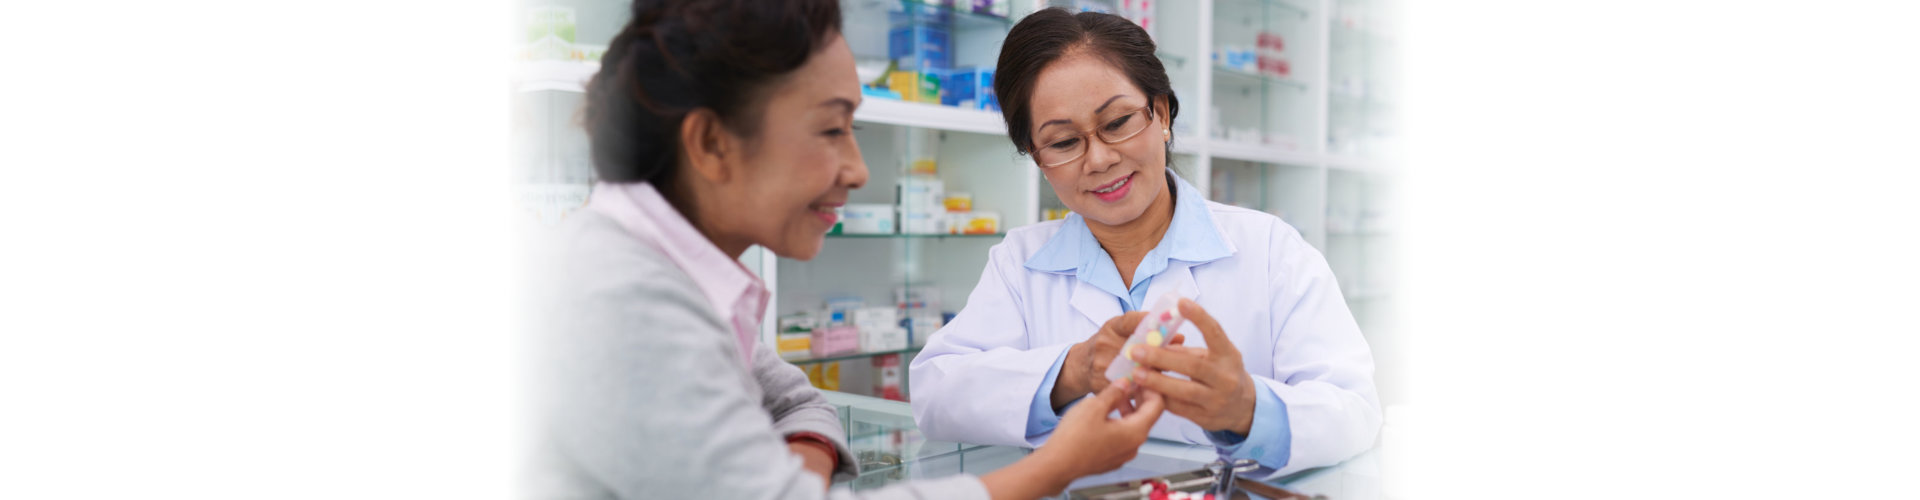 woman talking to a pharmacist